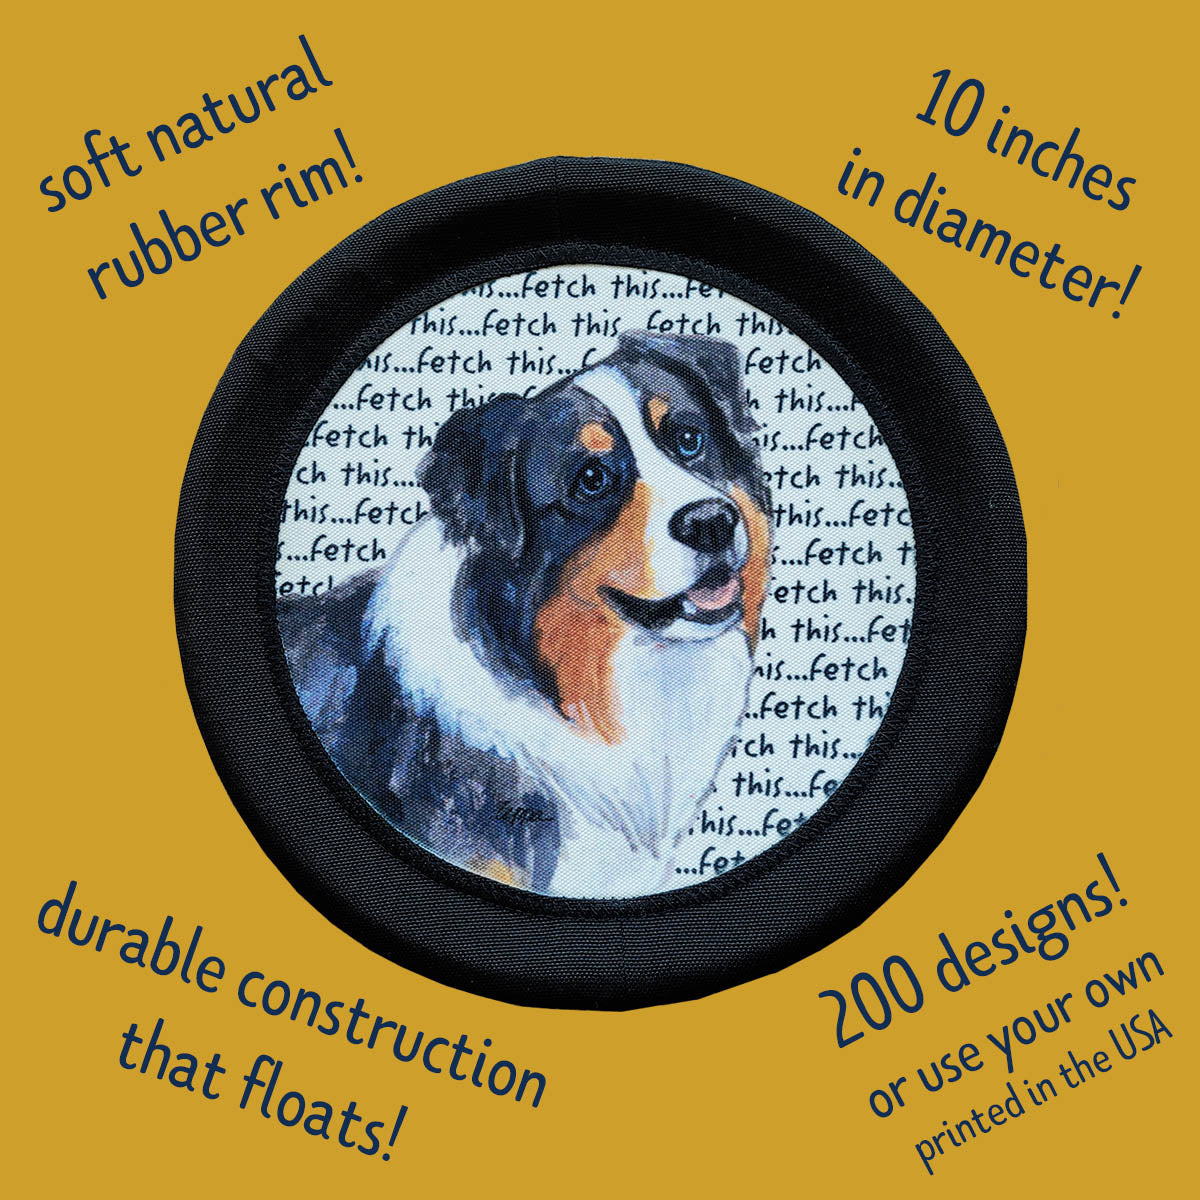 Features of the FotoFrisby Flying Disk Dog Toy - durable, soft, floats